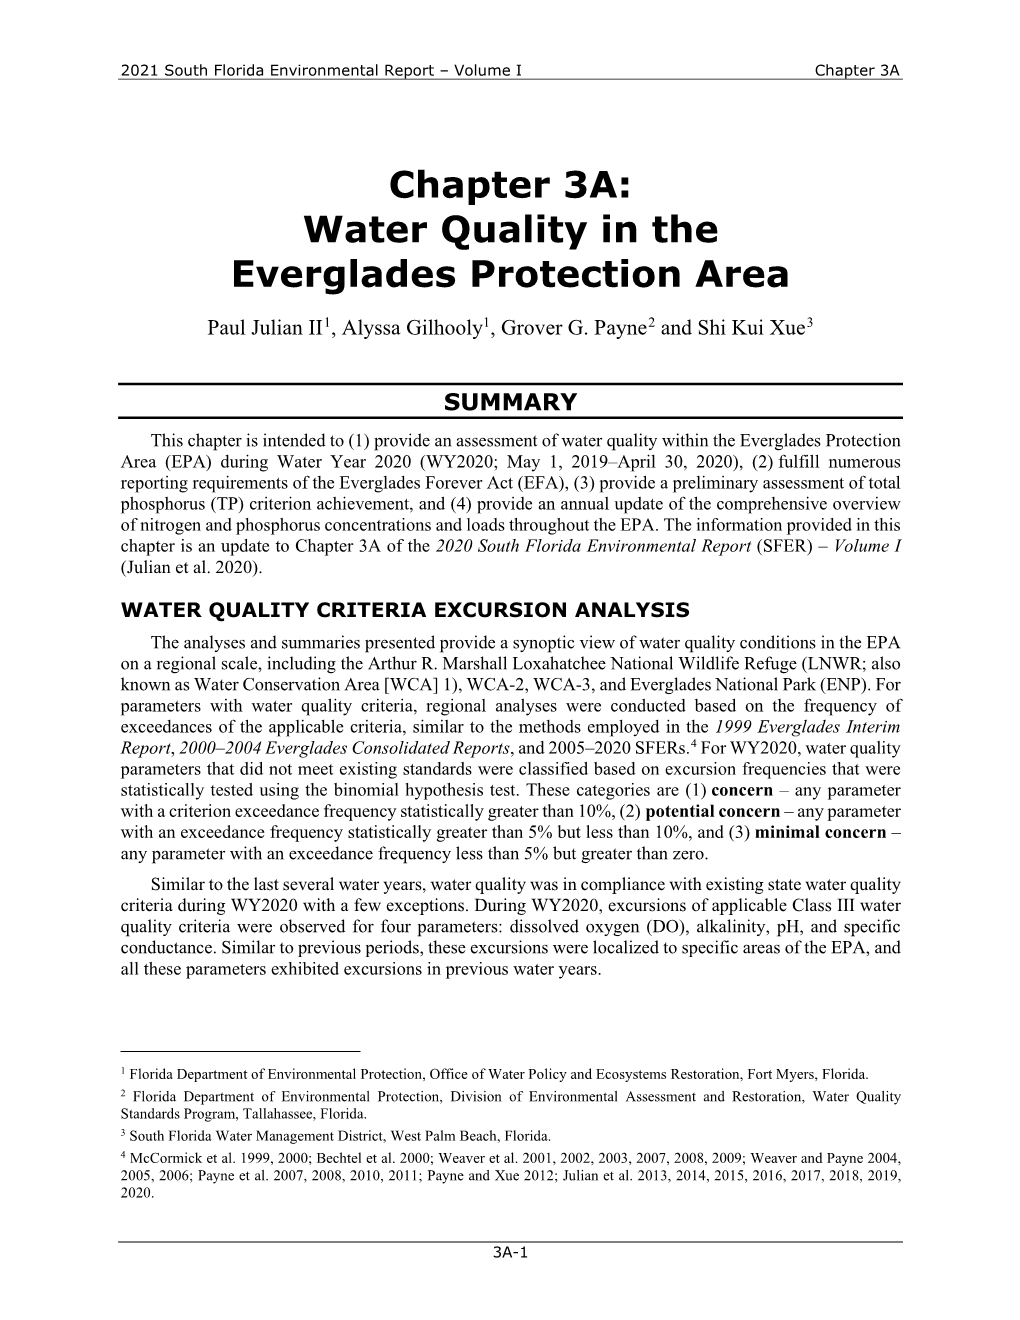 Chapter 3A: Water Quality in the Everglades Protection Area Paul Julian II1, Alyssa Gilhooly1, Grover G